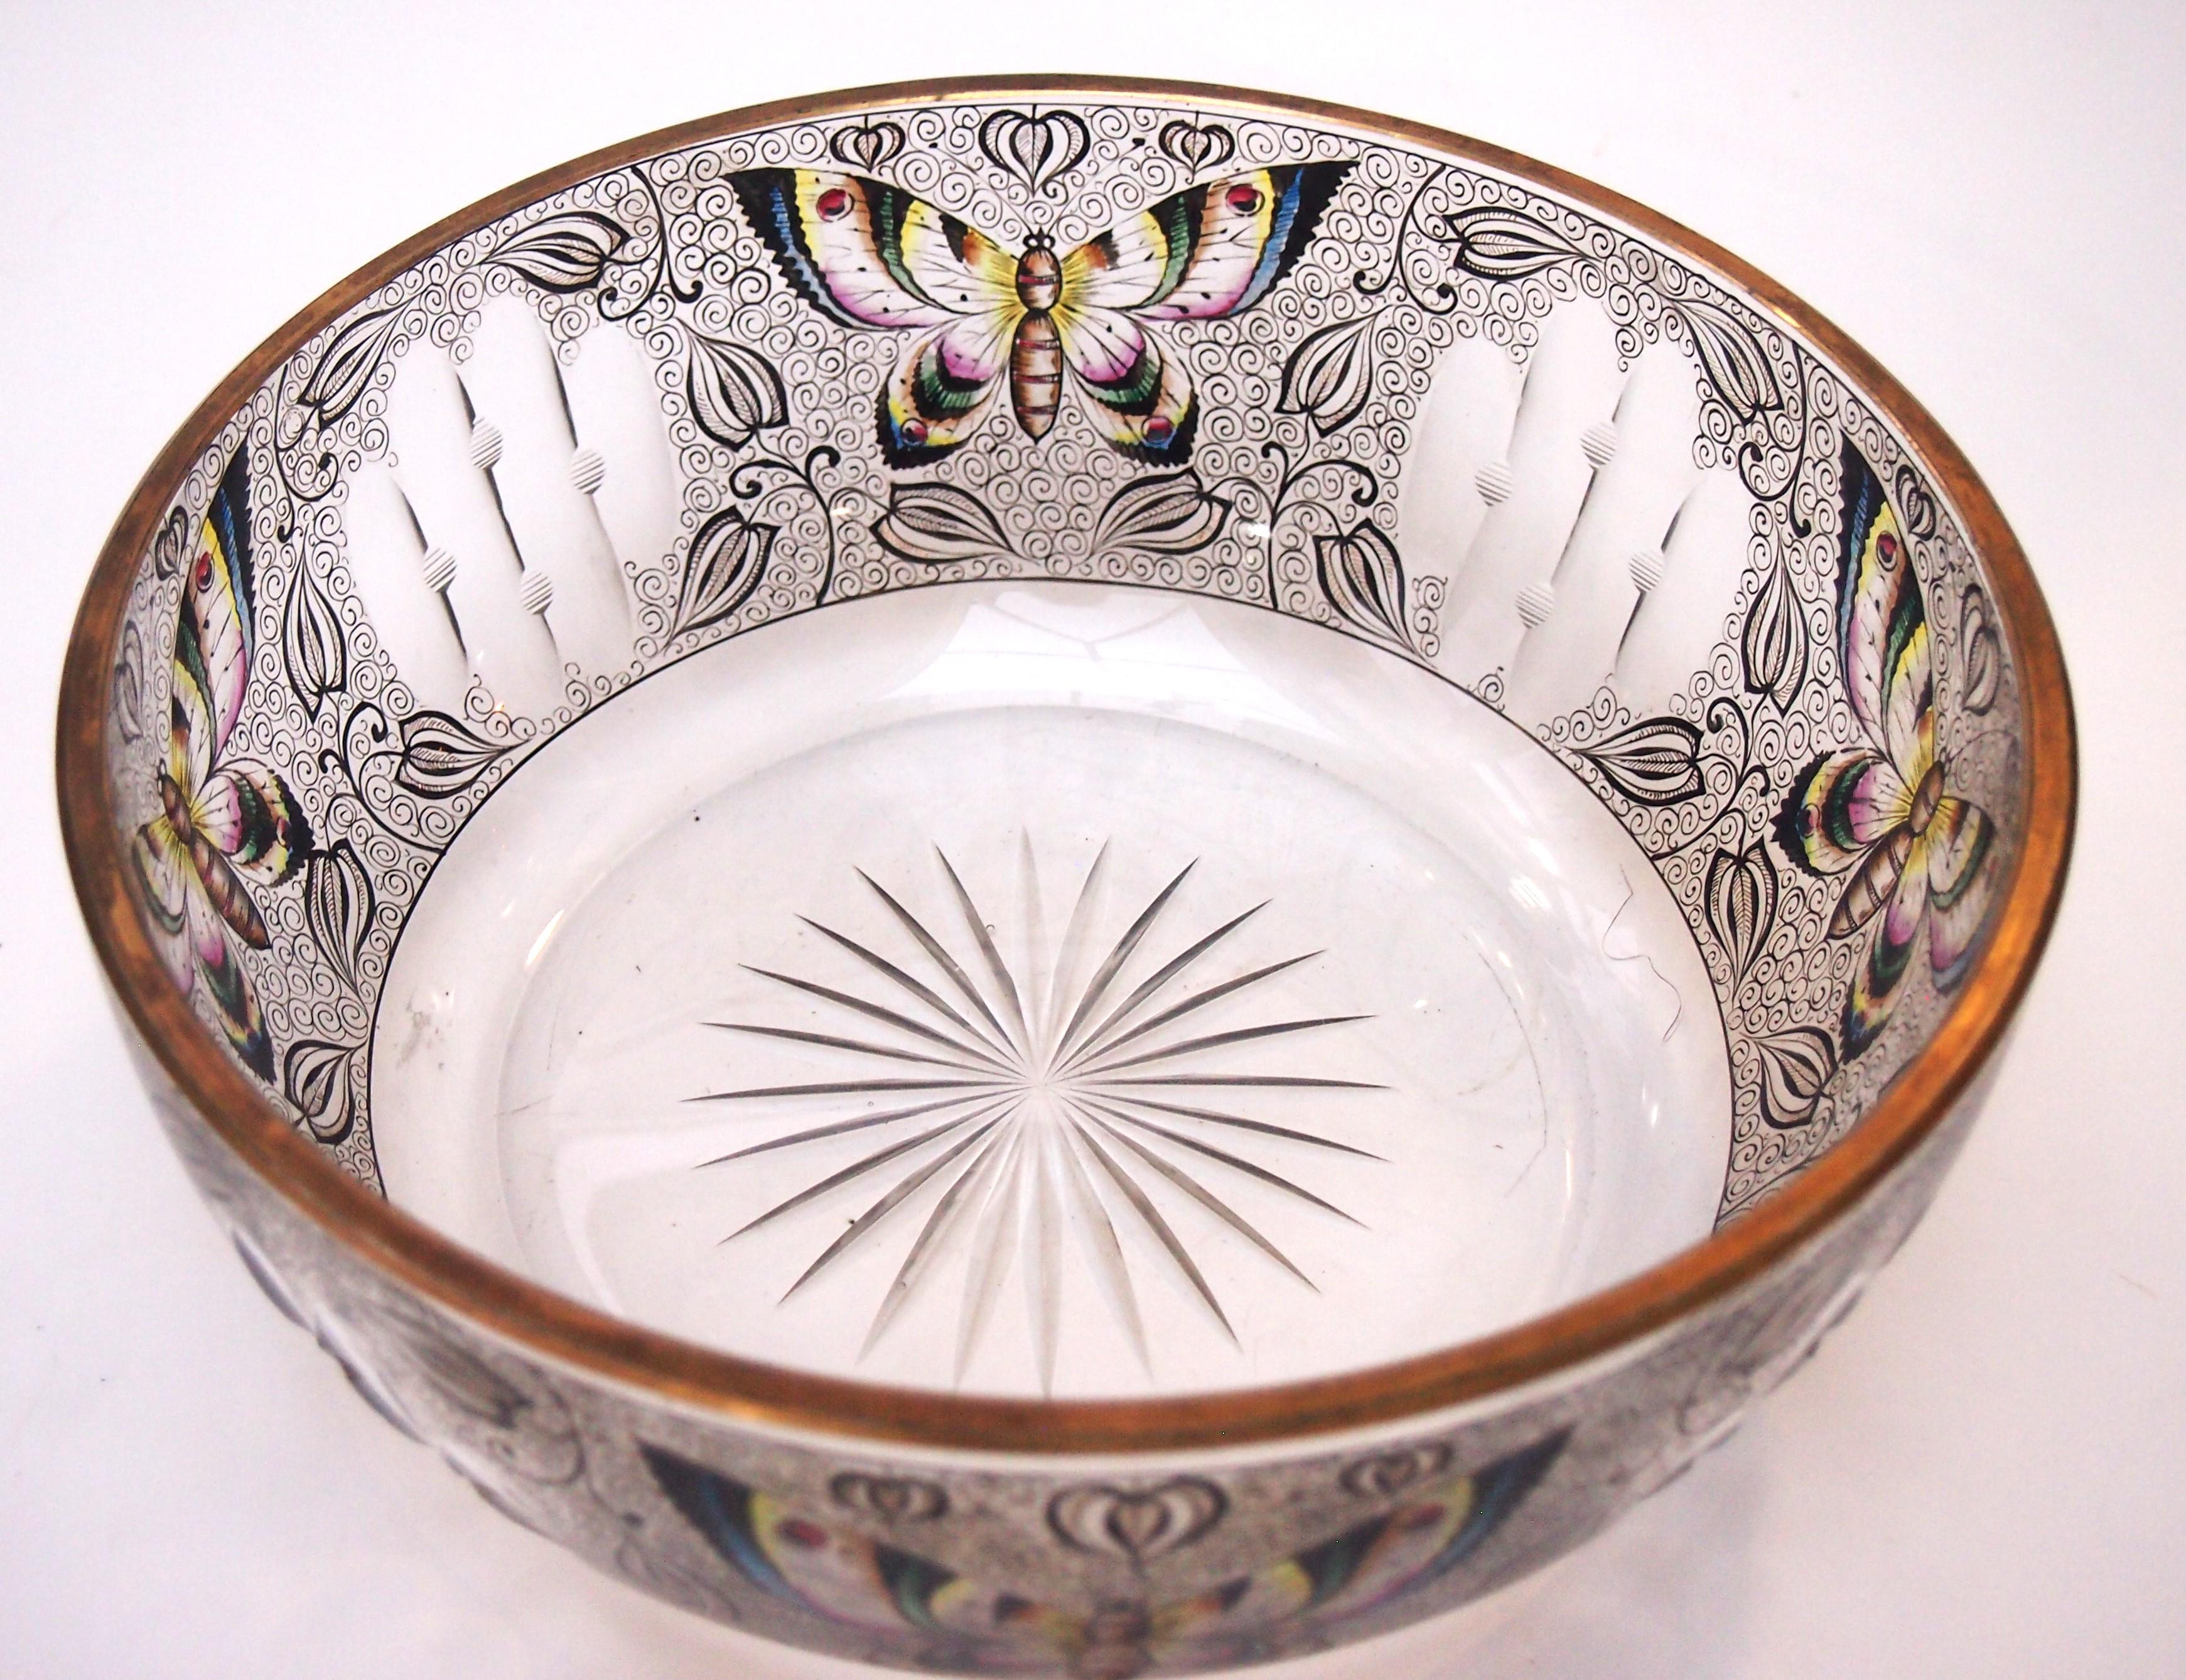 Fabulous large Fachschule Haida Enamel and Cut Butterfly Bowl. Hand cut and enamelled with stylised black patterns and 4 fabulous polychrome butterfly panels -with a traditional star cut base -This dates to around 1910. The Butterfly design and